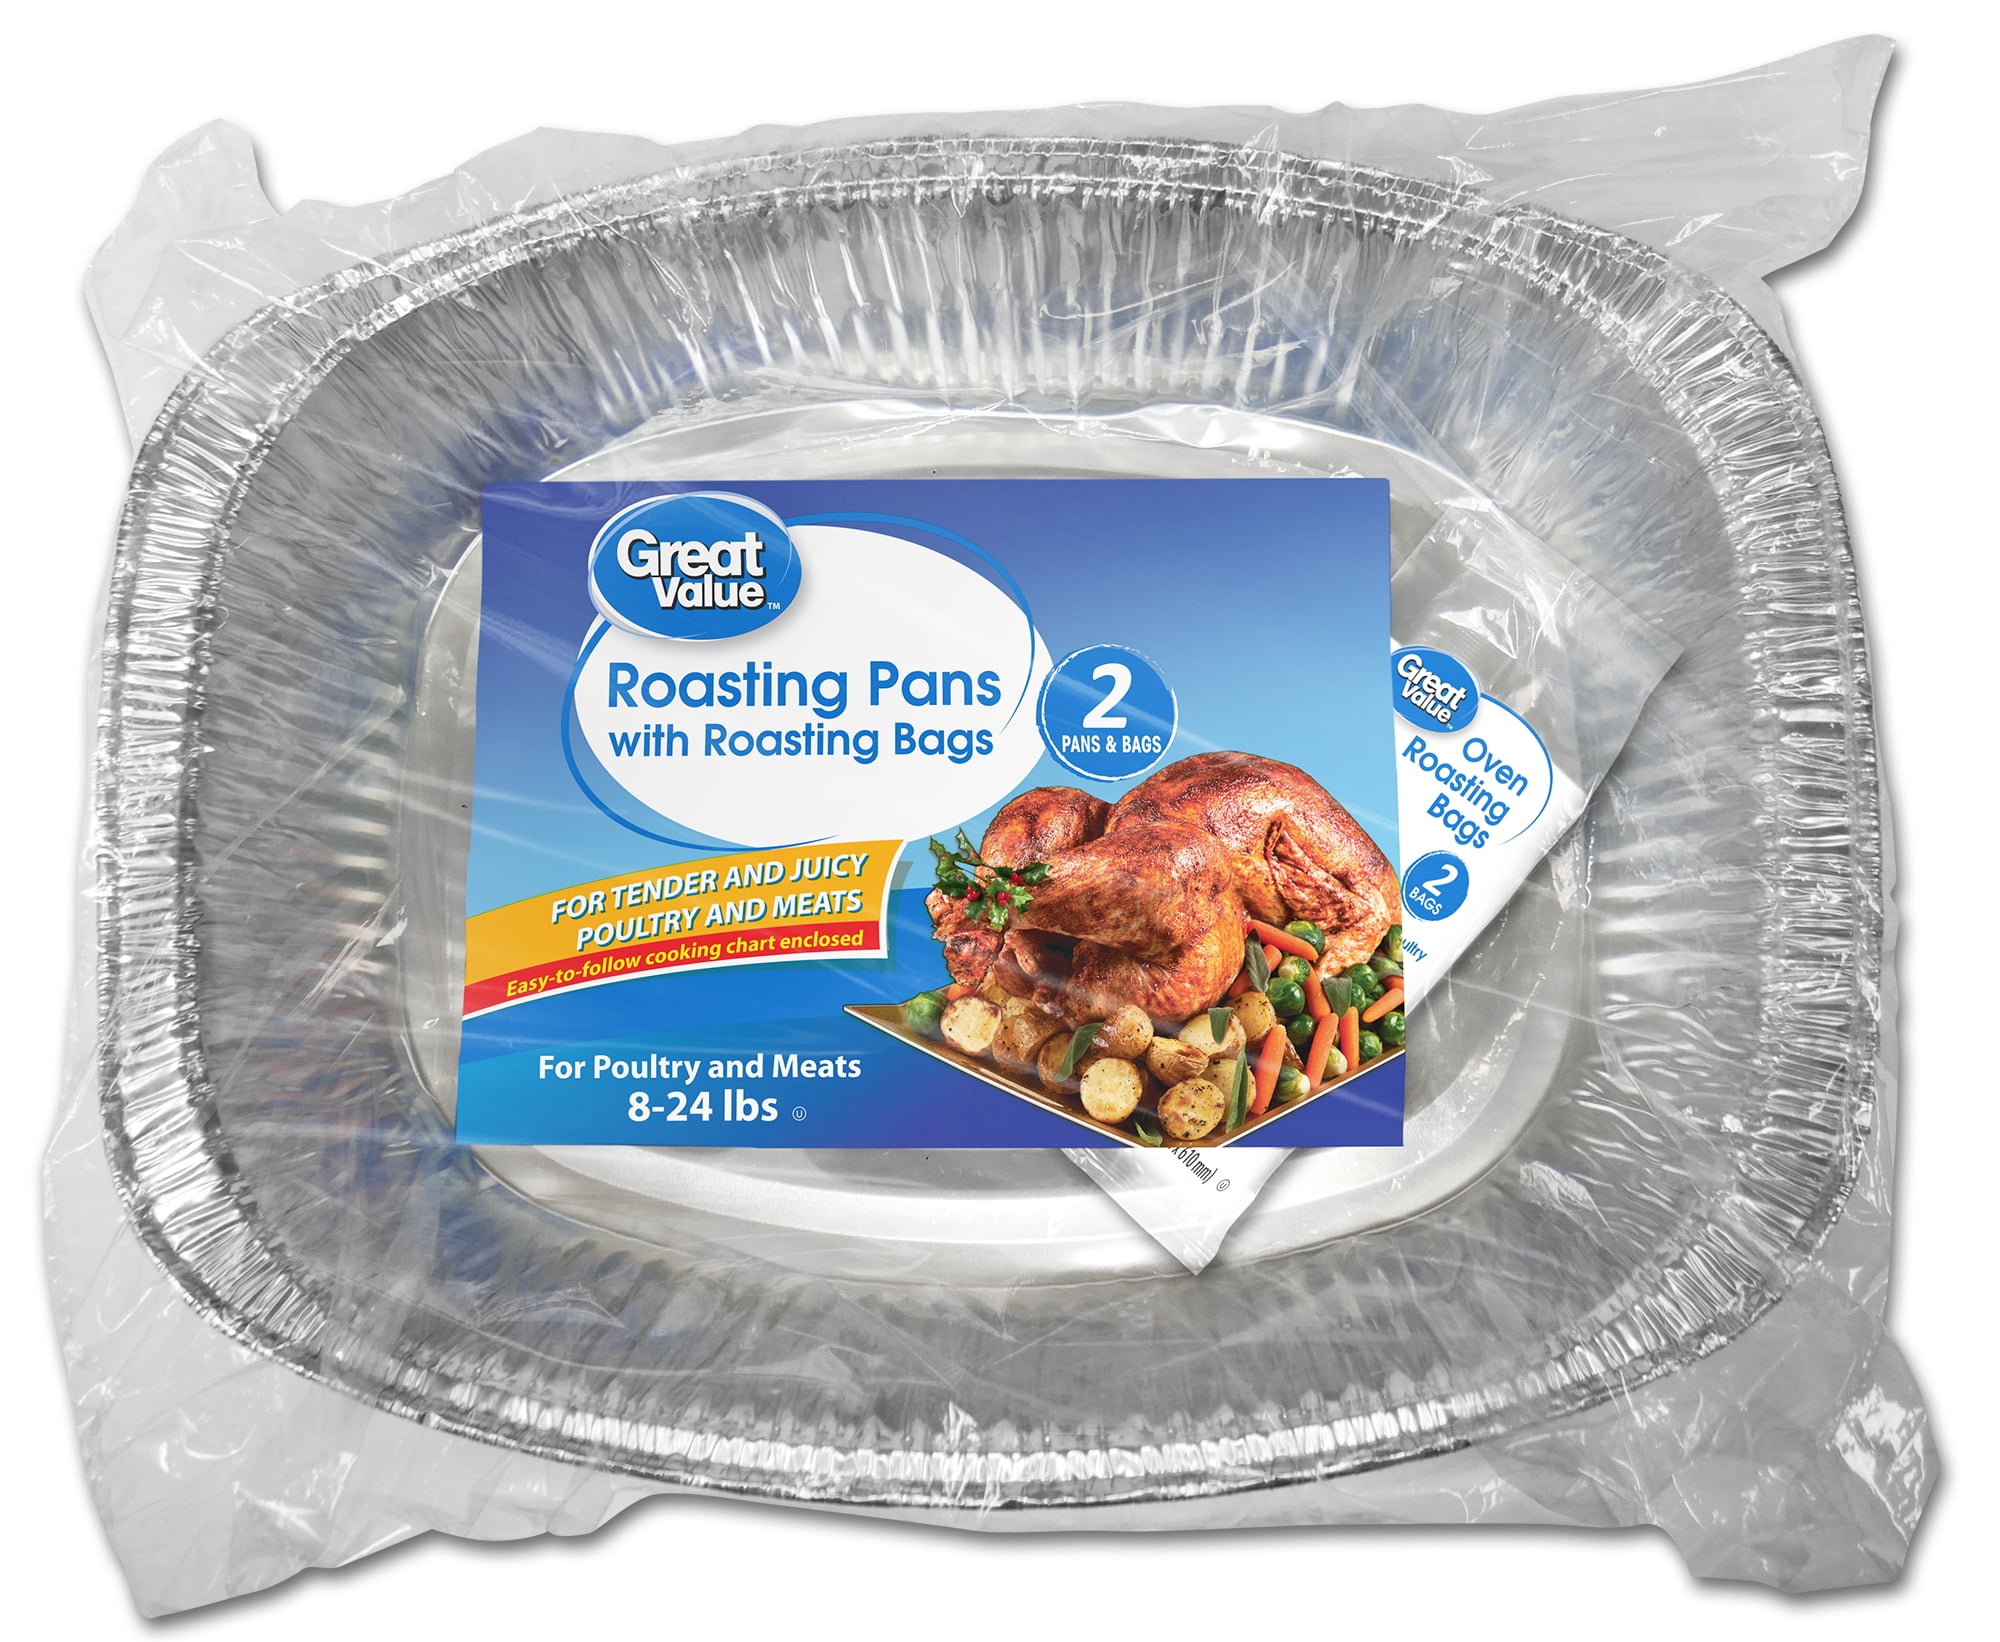 OOFLAYE 20 counts oven bags turkey size  large oven bag for thangkgiving  day turkey roasting